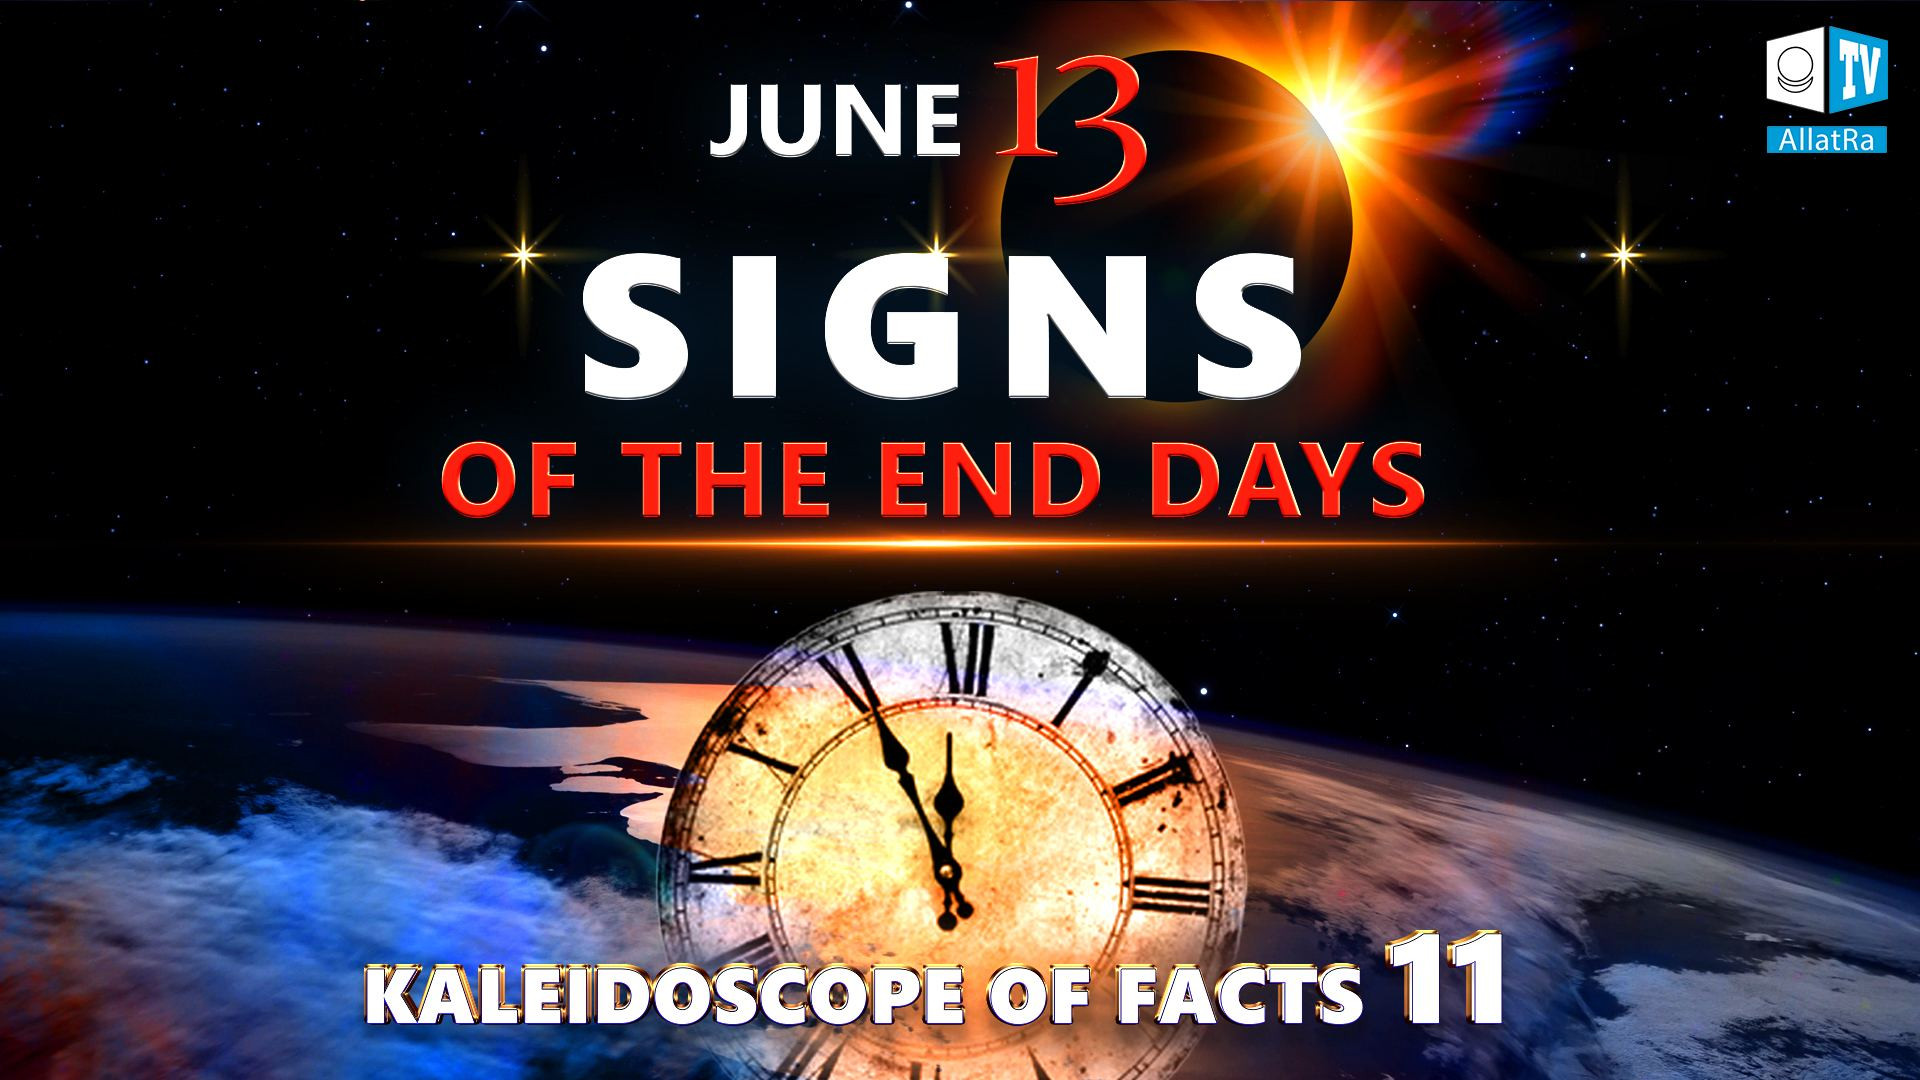 Signs of the End Days. Kaleidoscope of Facts 11